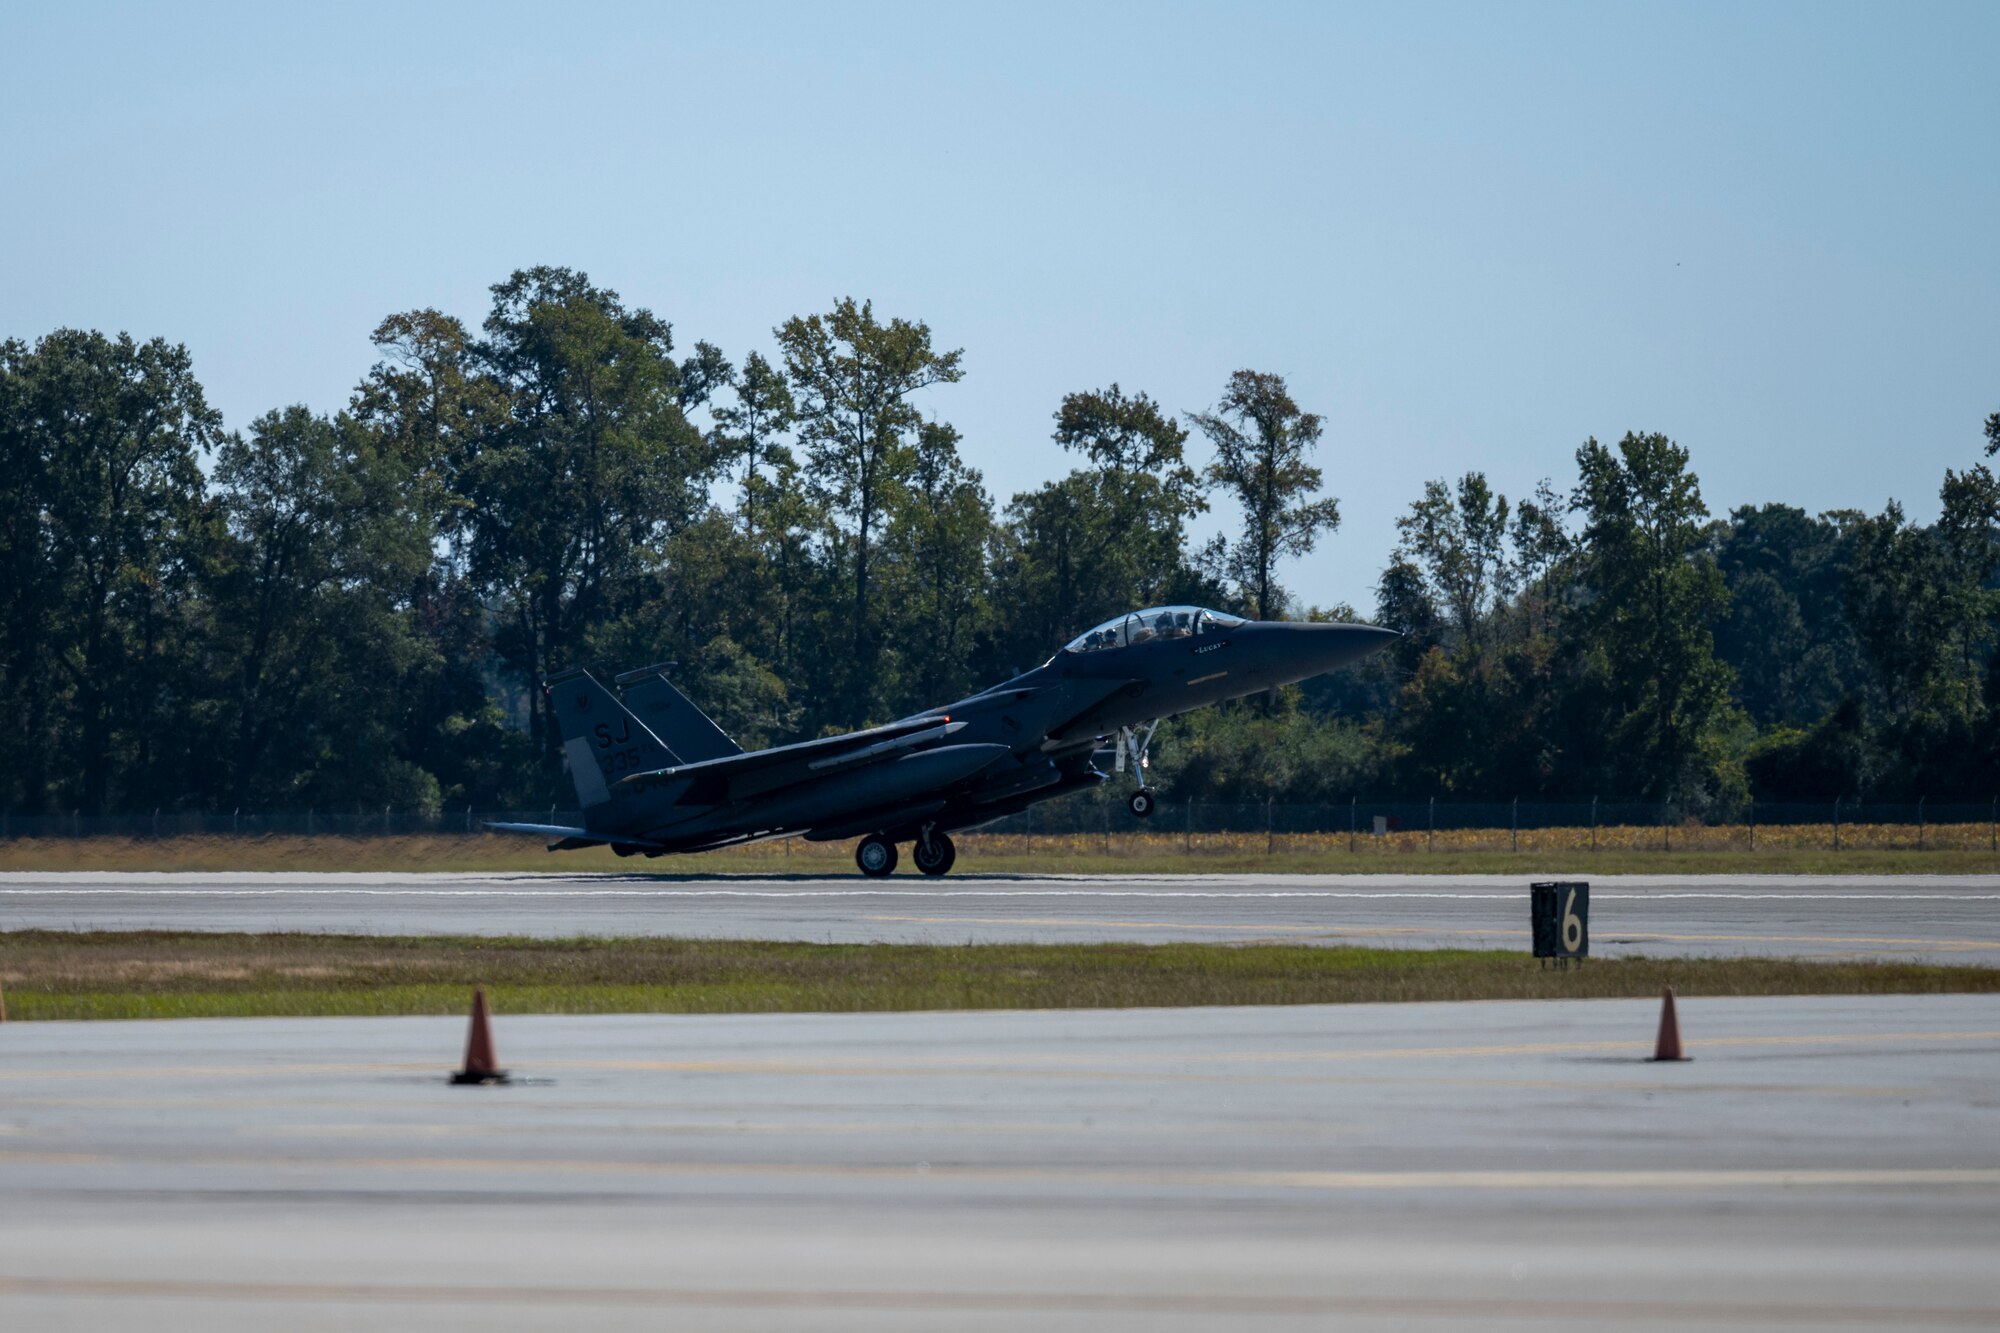 Airmen assigned to the 4th Fighter Wing return from a deployment at Seymour Johnson Air Force Base, North Carolina, Oct. 19, 2022. The 4th FW deployed to provide a defensive posture to military personnel stationed in the Air Force’s Central Command area of responsibility. (U.S. Air Force photo by Senior Airman Kevin Holloway)